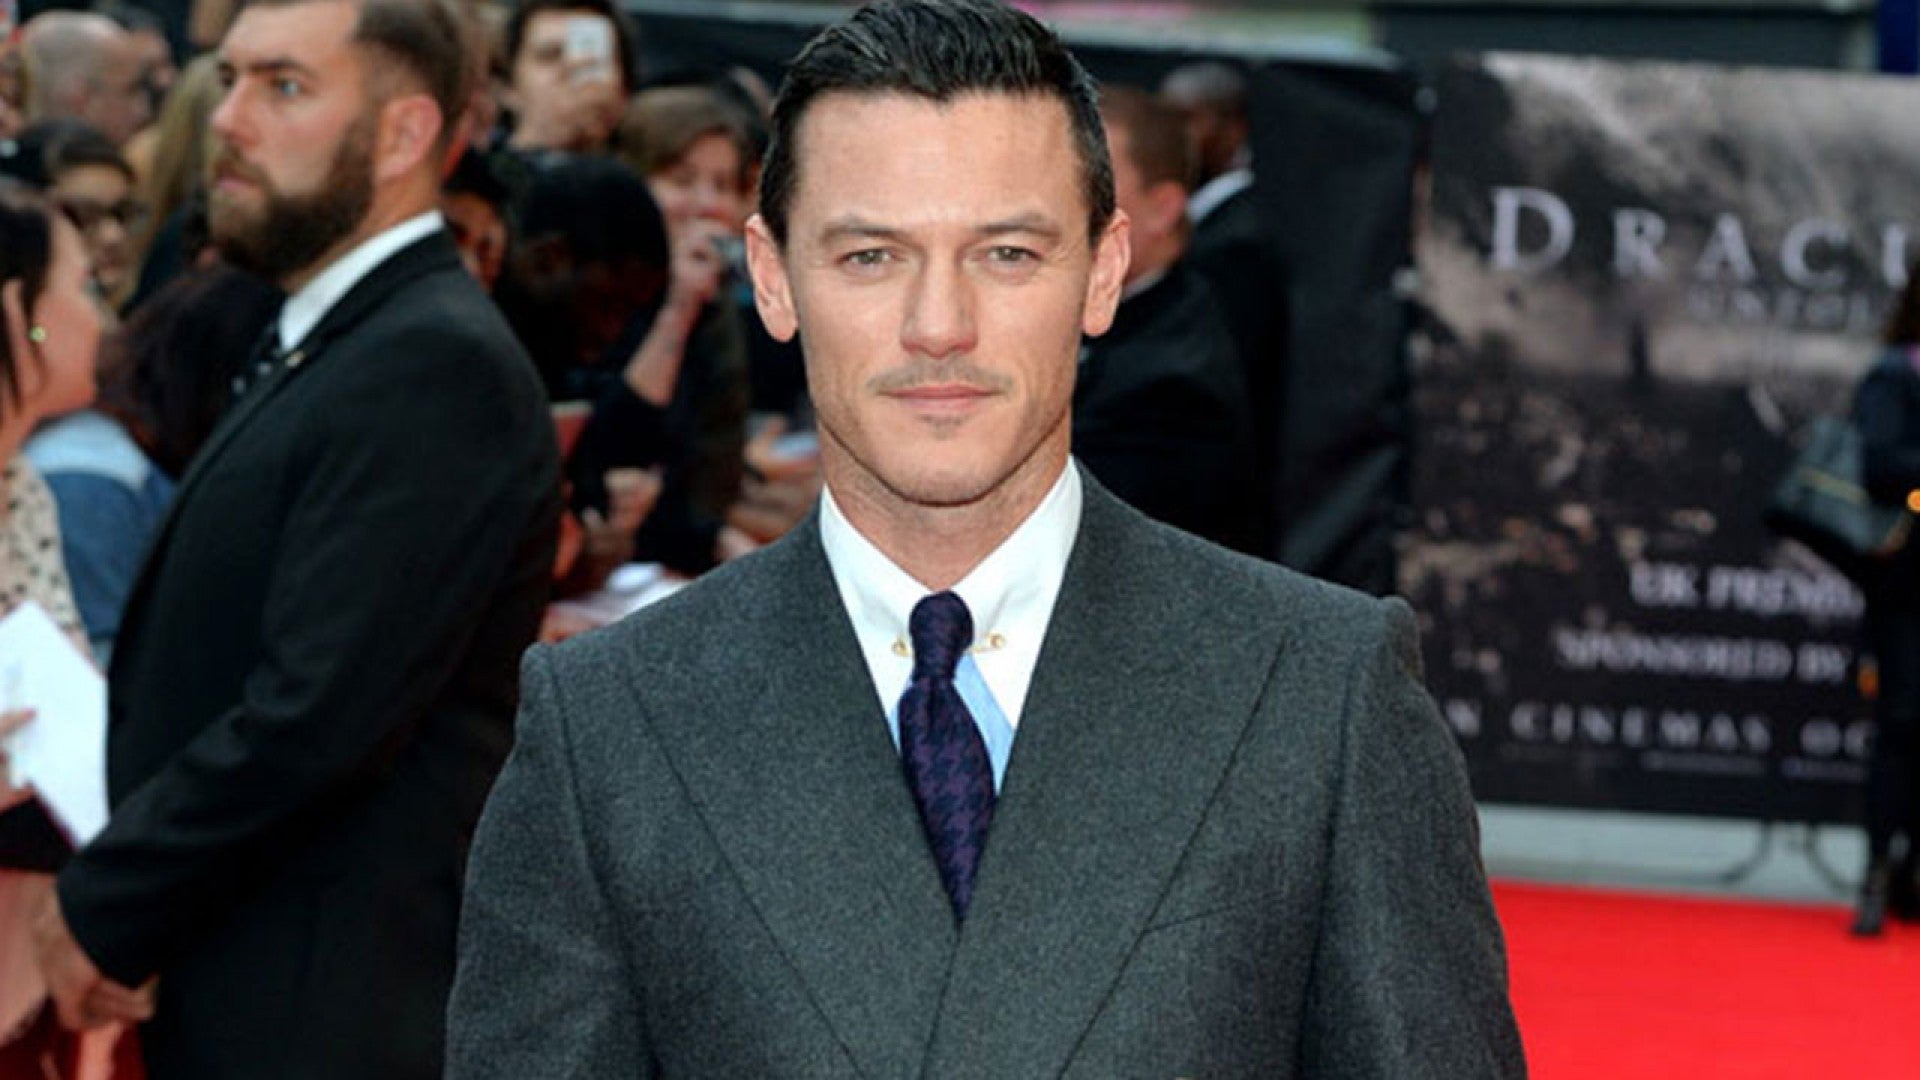 Beauty And The Beast Star Luke Evans Shows Off Muscles In